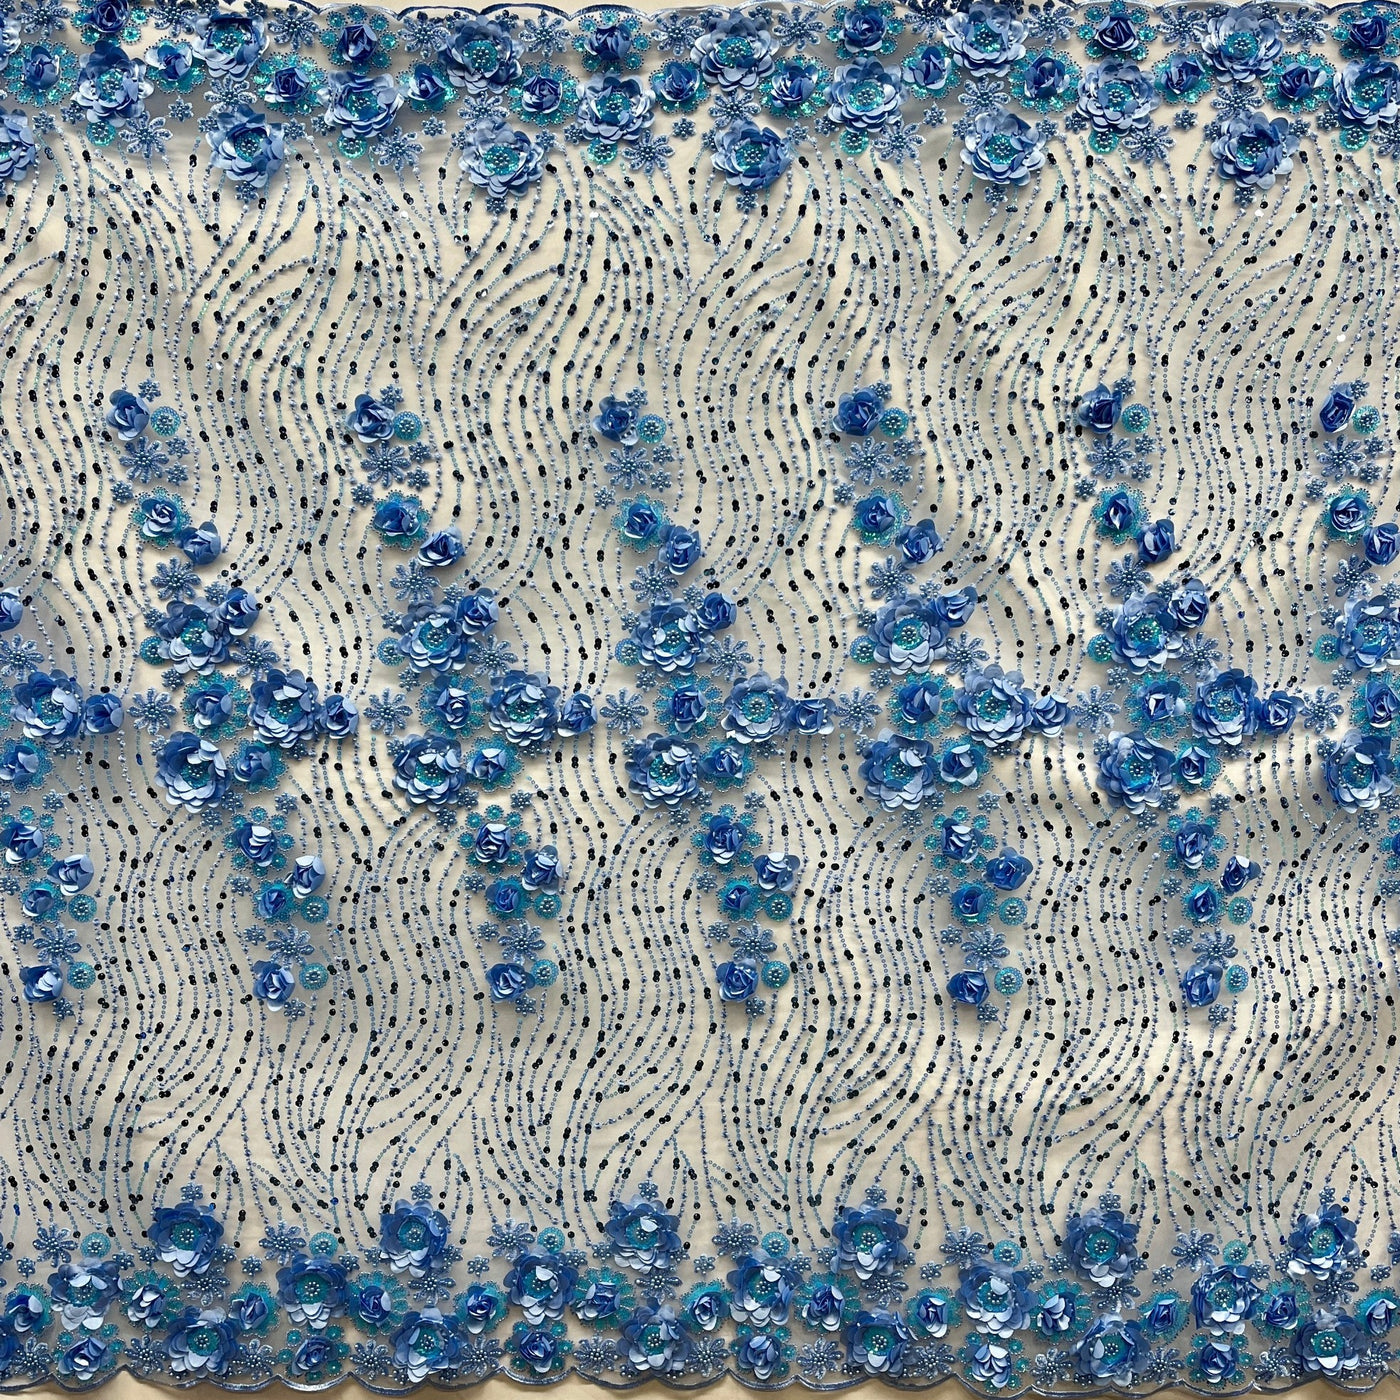 Beaded and Sequined 3D Floral Sparkling Lace Fabric Embroidered on 100% Polyester Net Mesh | Lace USA - GD-2212 Lt. Blue